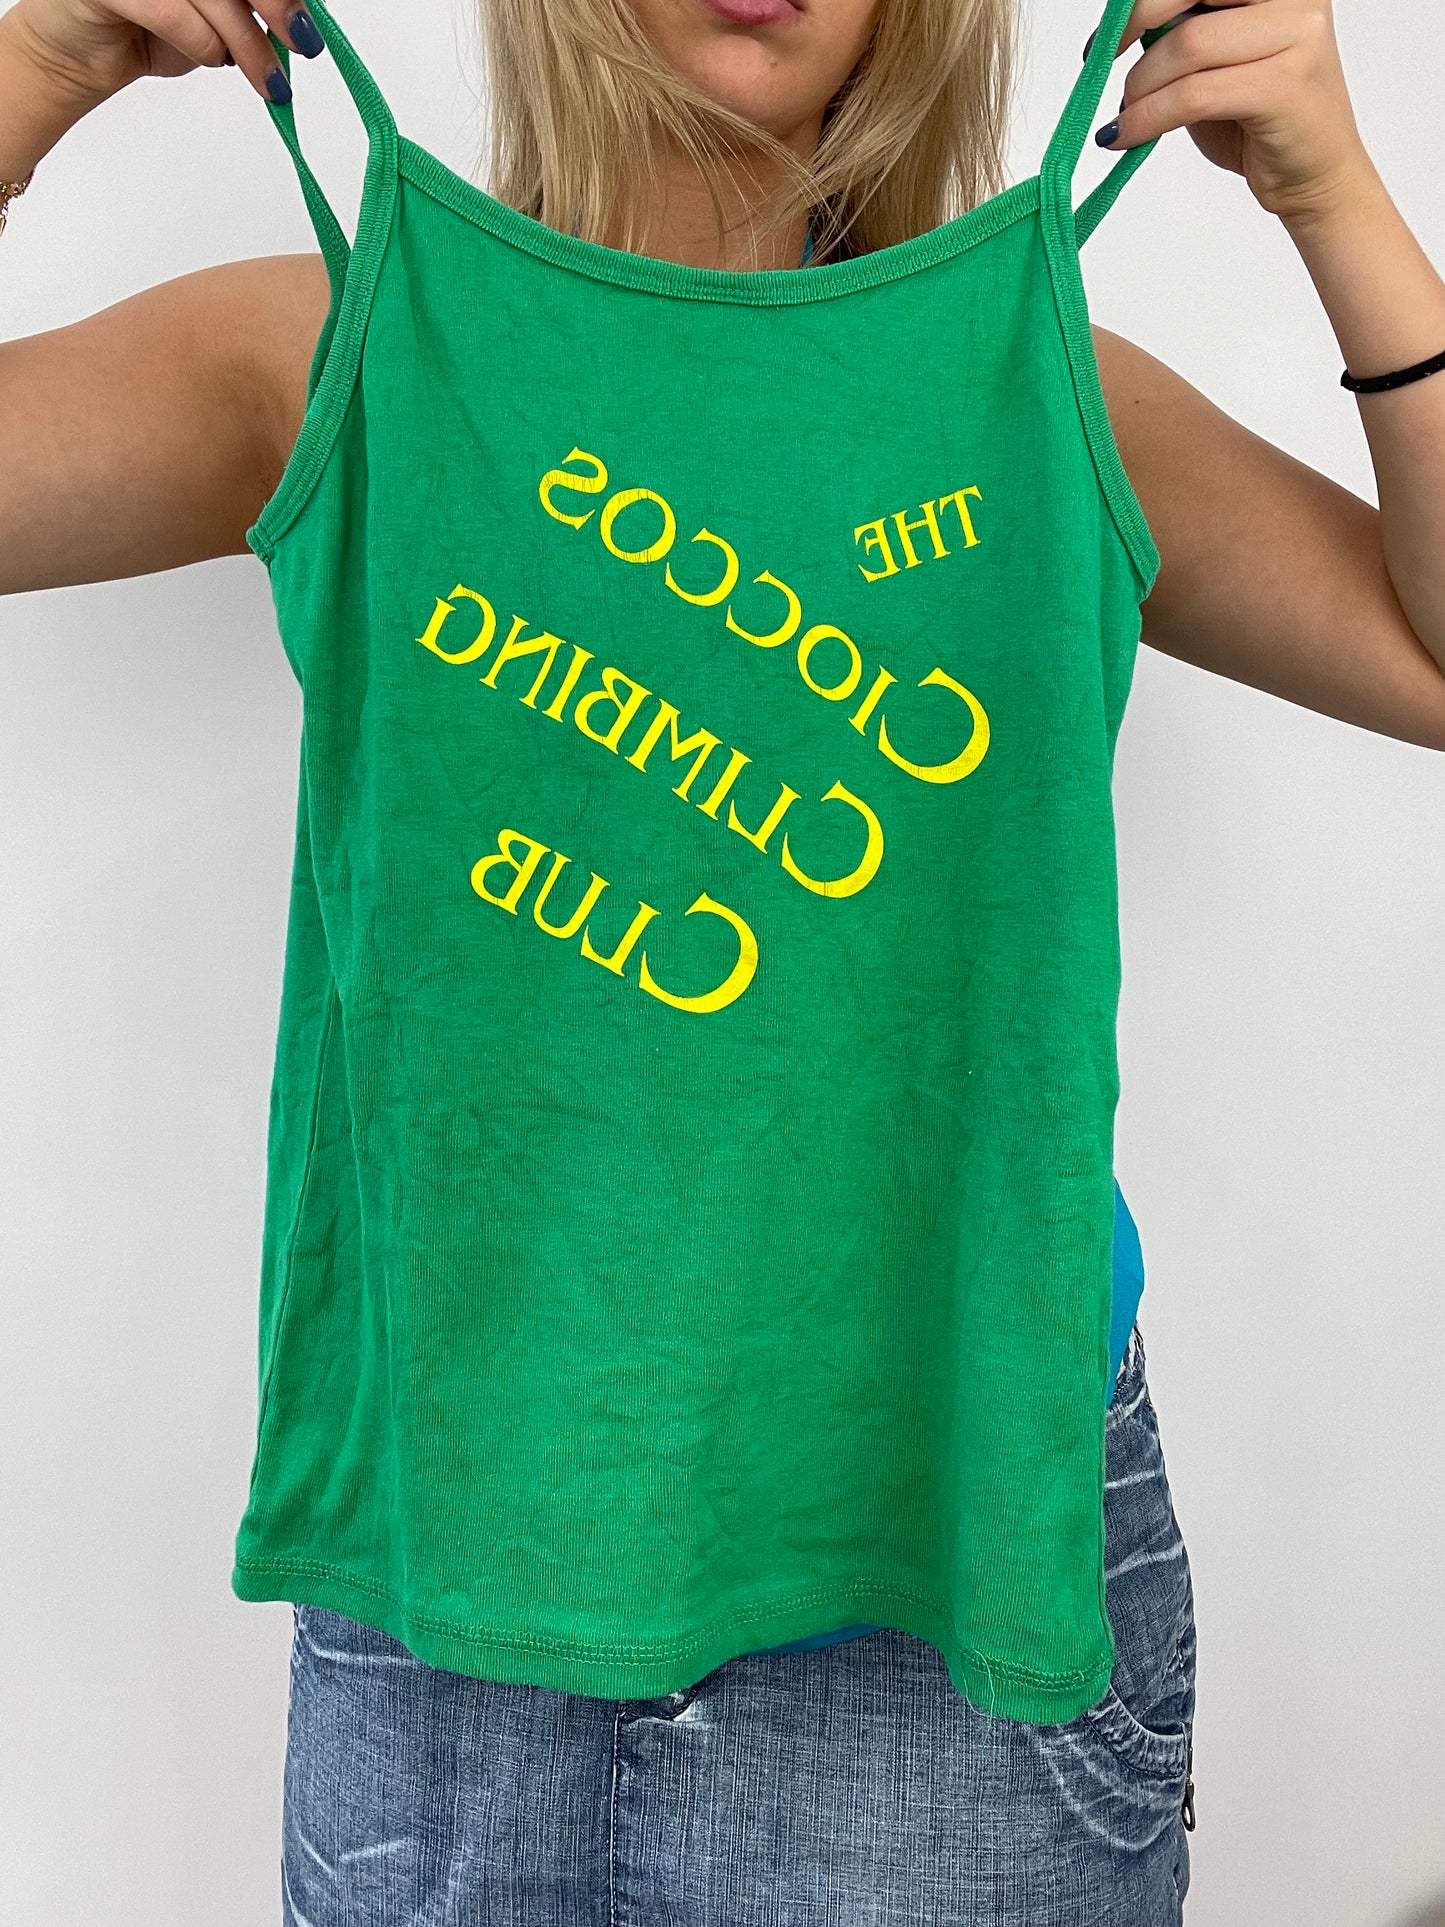 ADDISON RAE DROP | small green tank top with graphic writing on the back